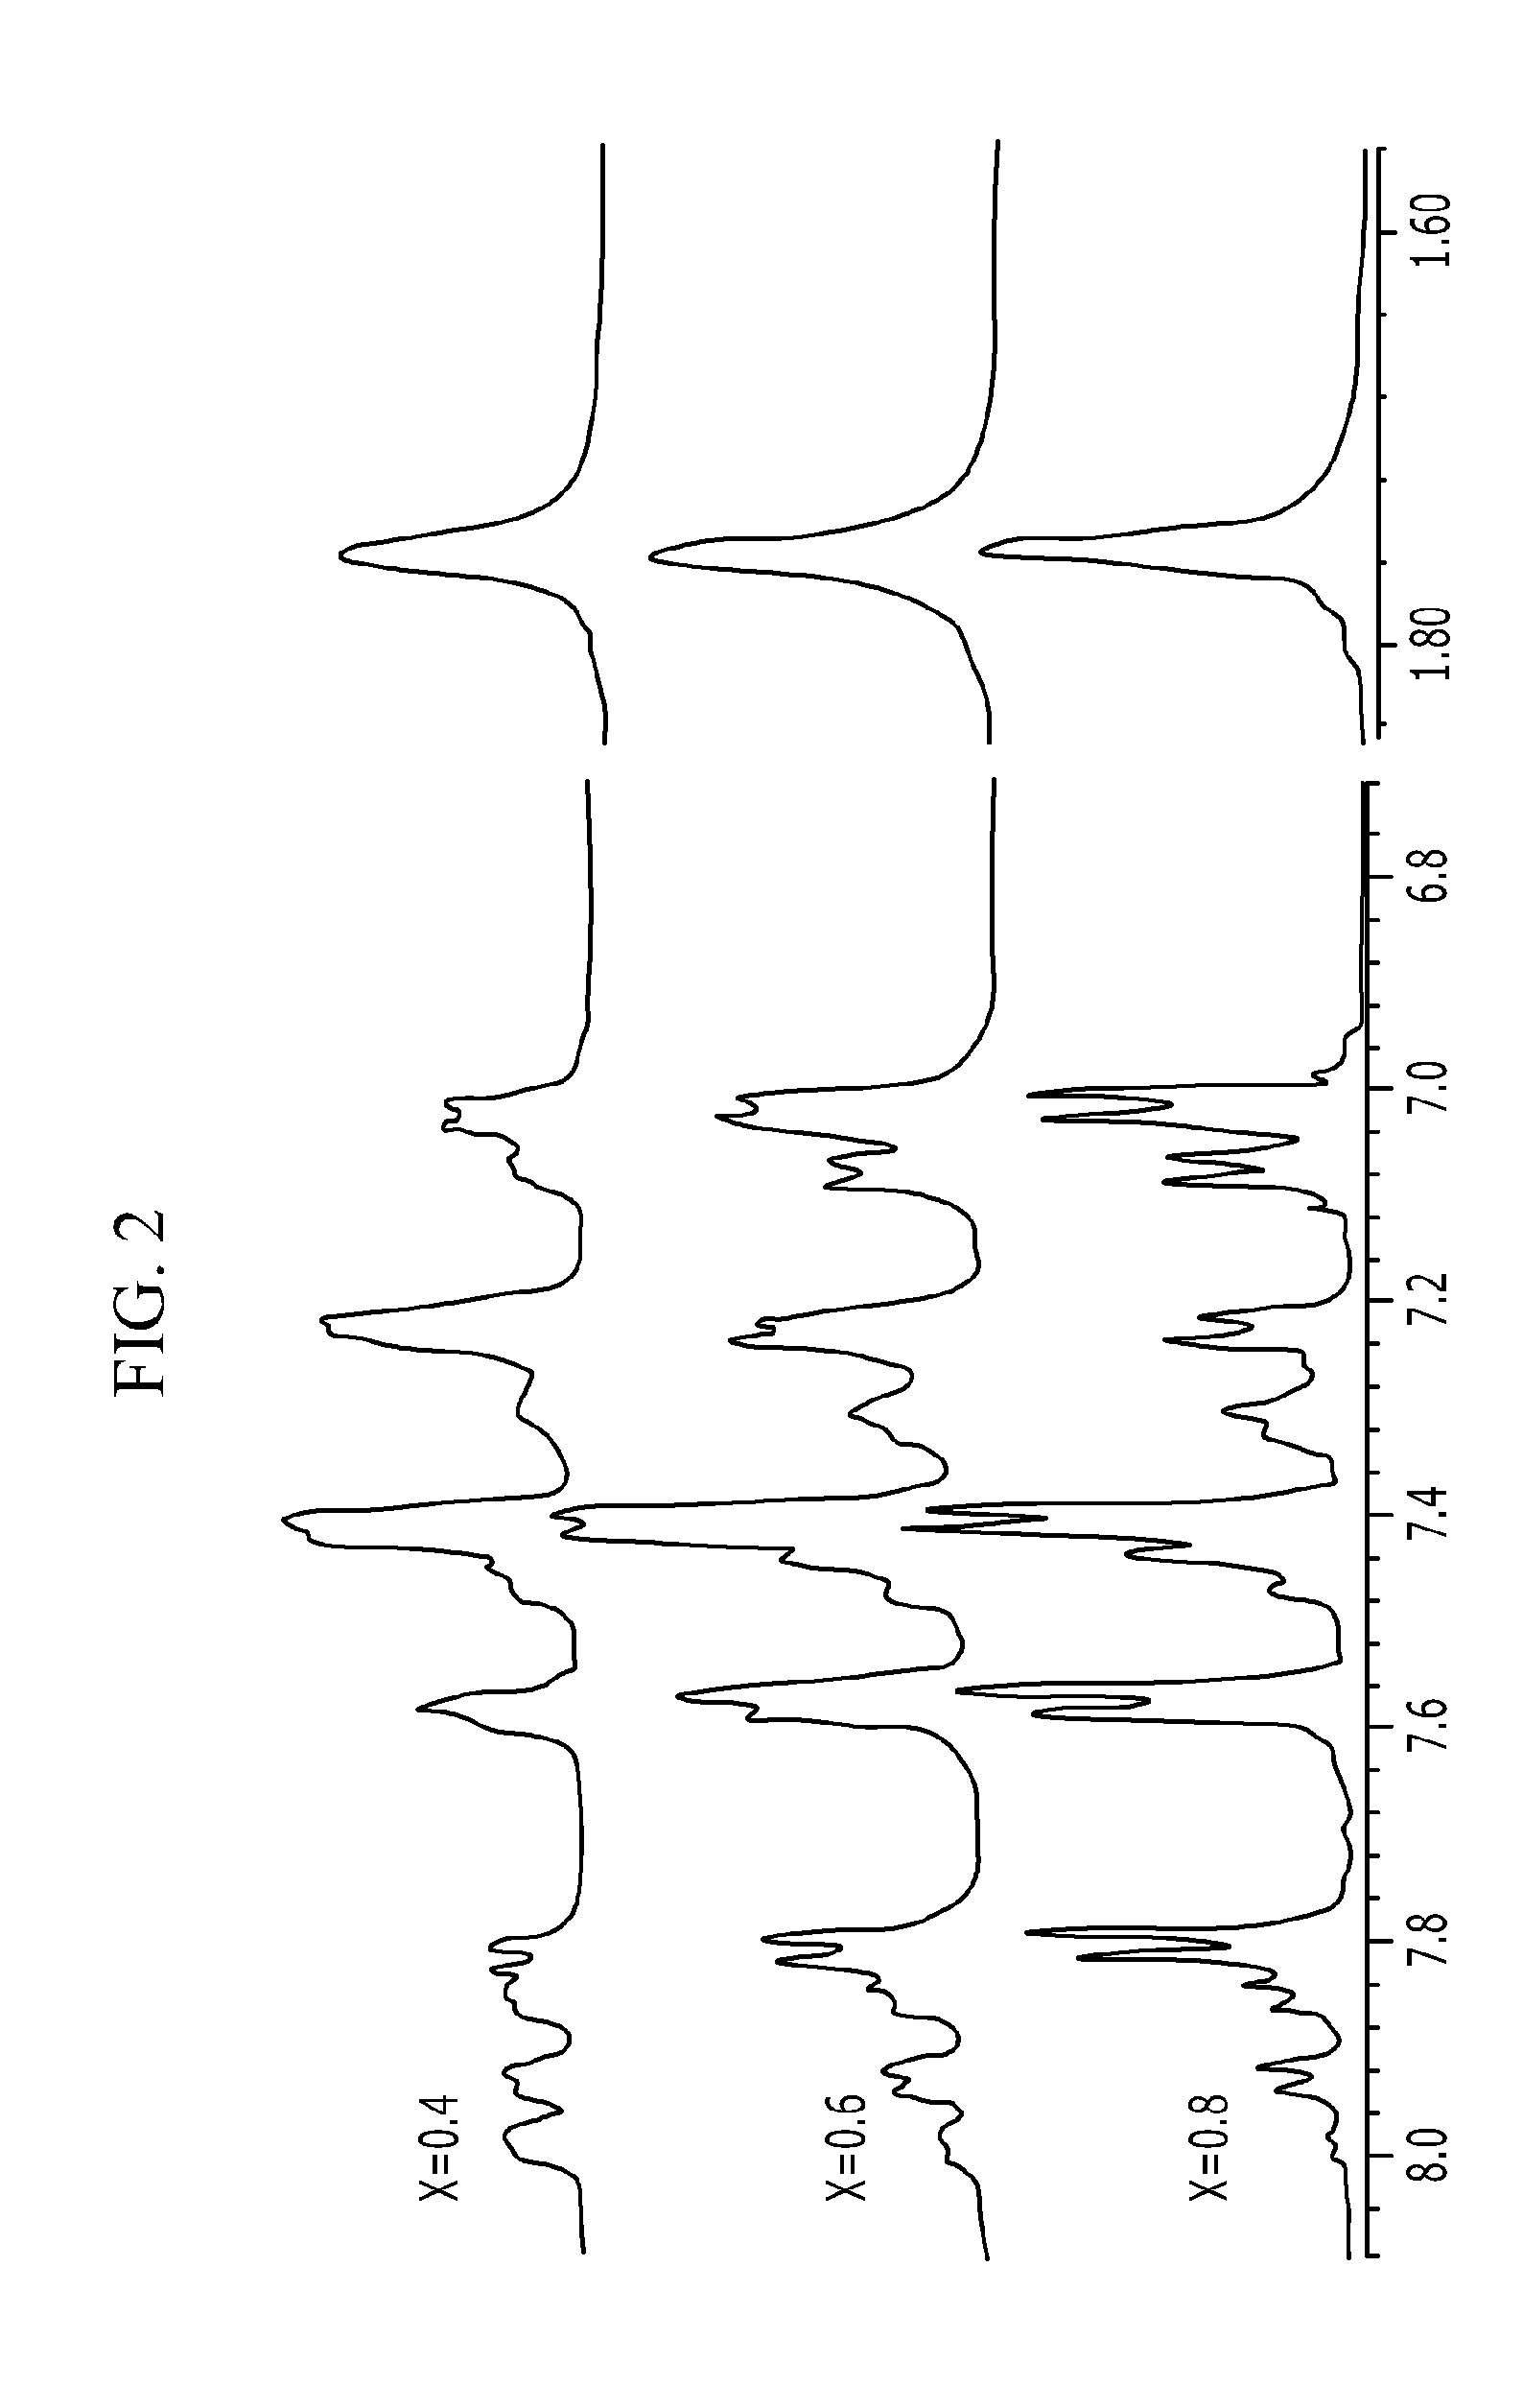 Sulfonated poly(arylene ether) copolymers and related polymer electrolyte membranes and fuel cells